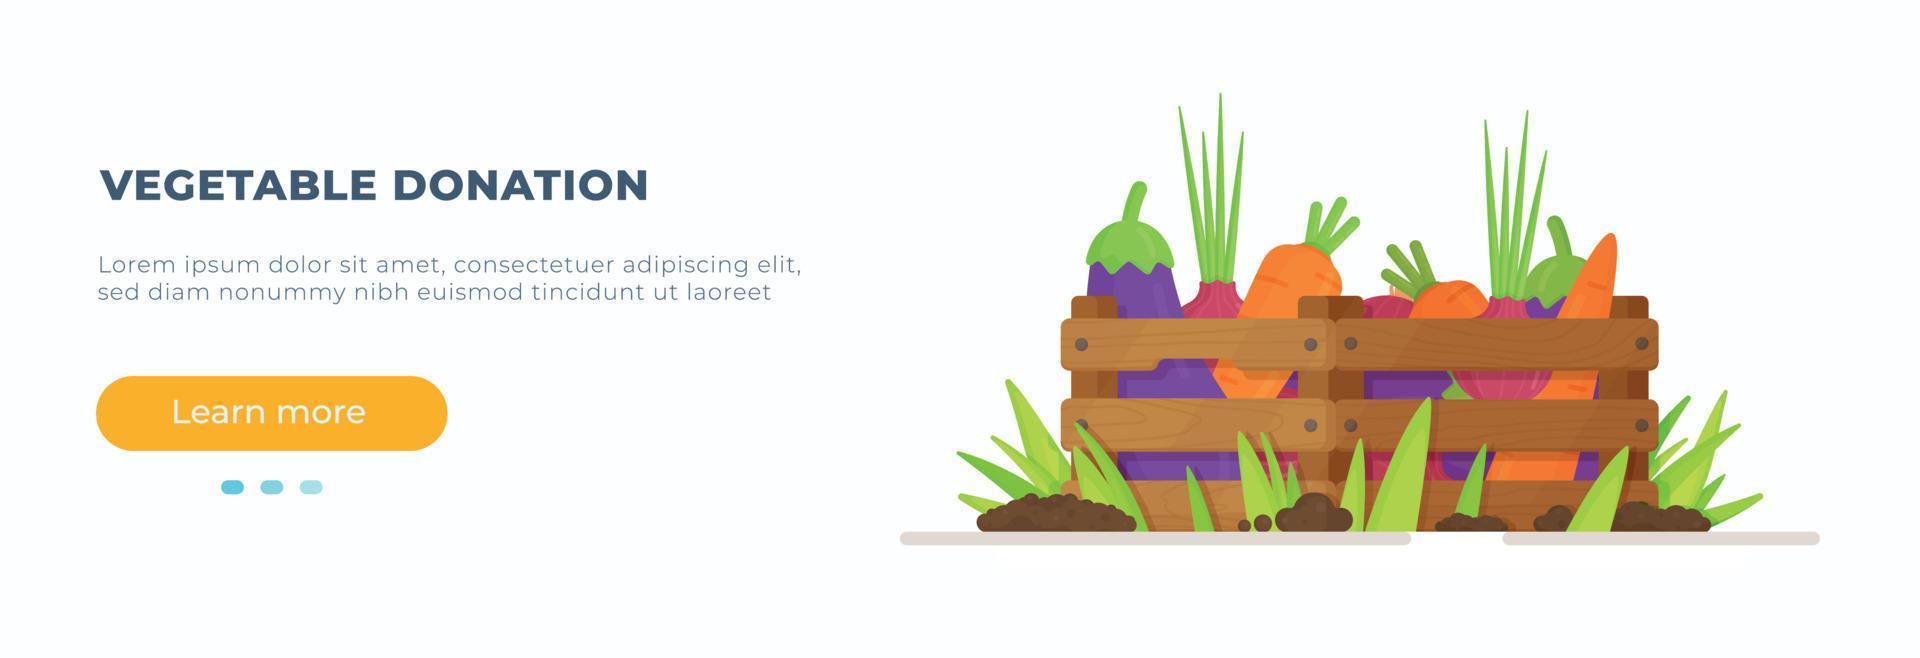 Vector illustration of harvesting the old crop and planting the new one. Gardening in a vegetable garden or orchard.